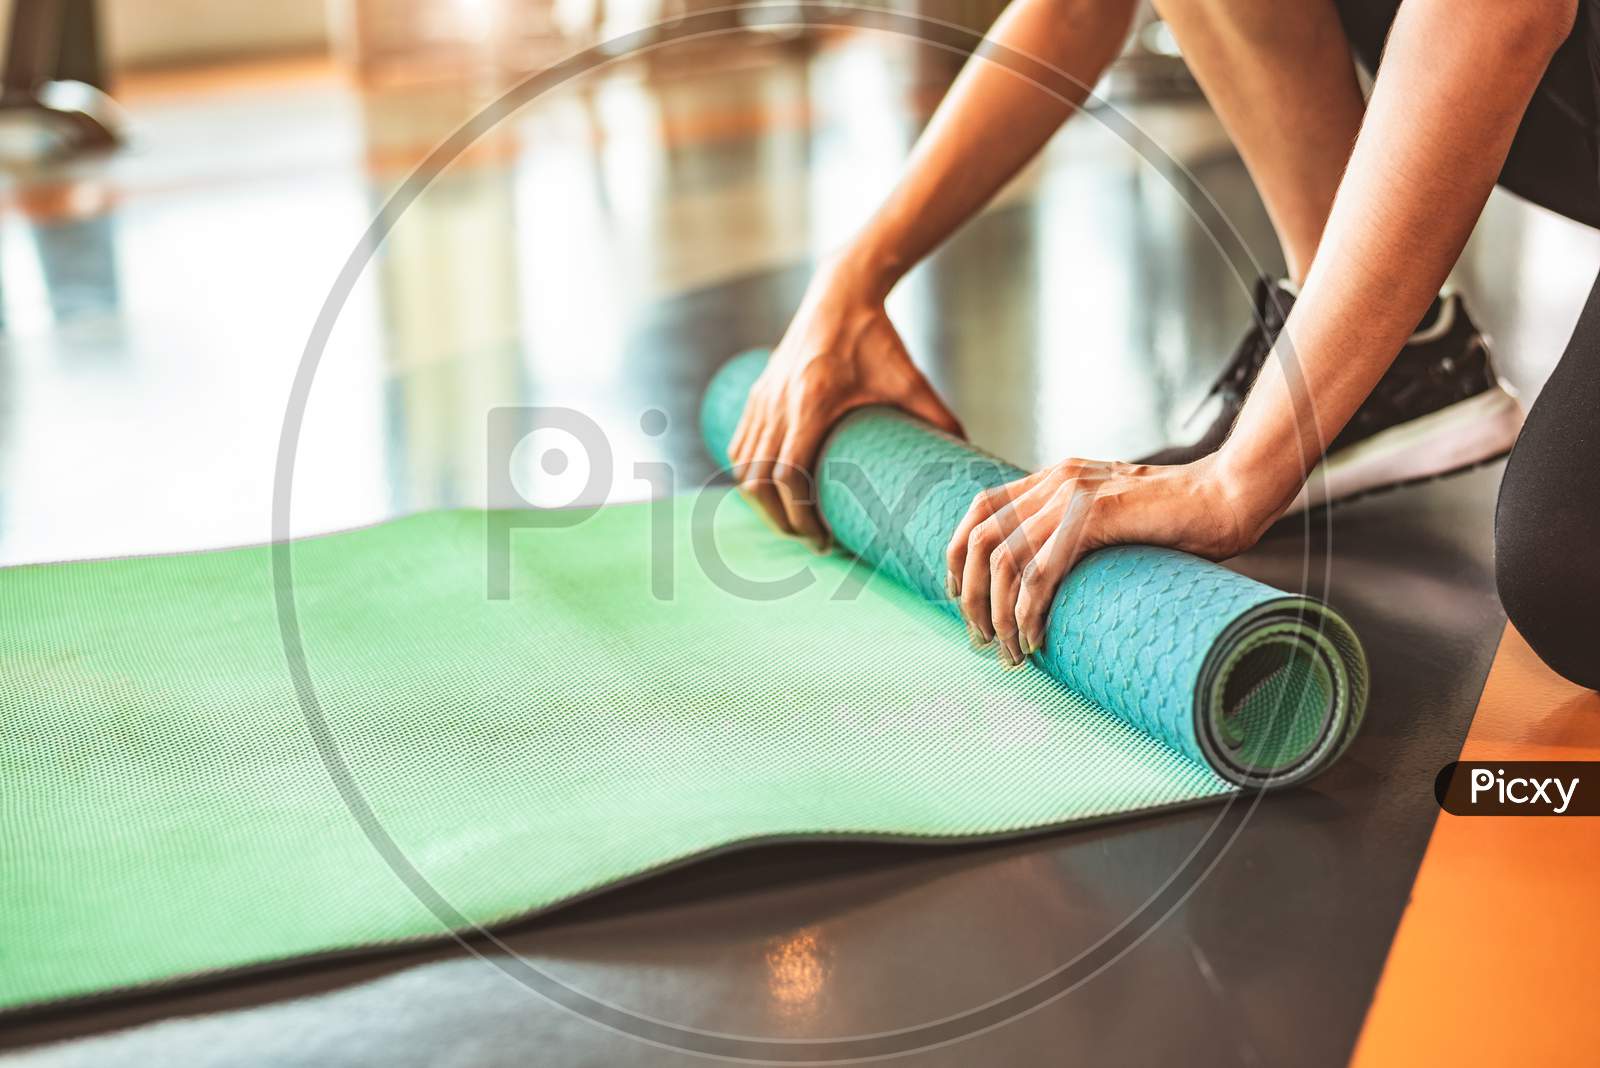 Close Up Of Sporty Woman Folding Yoga Mattress In Sport Fitness Gym Training Center Background. Exercise Mat Rolling Keeping After Yoga Class. Workout And Sport Training Concept. Hands On Carpet